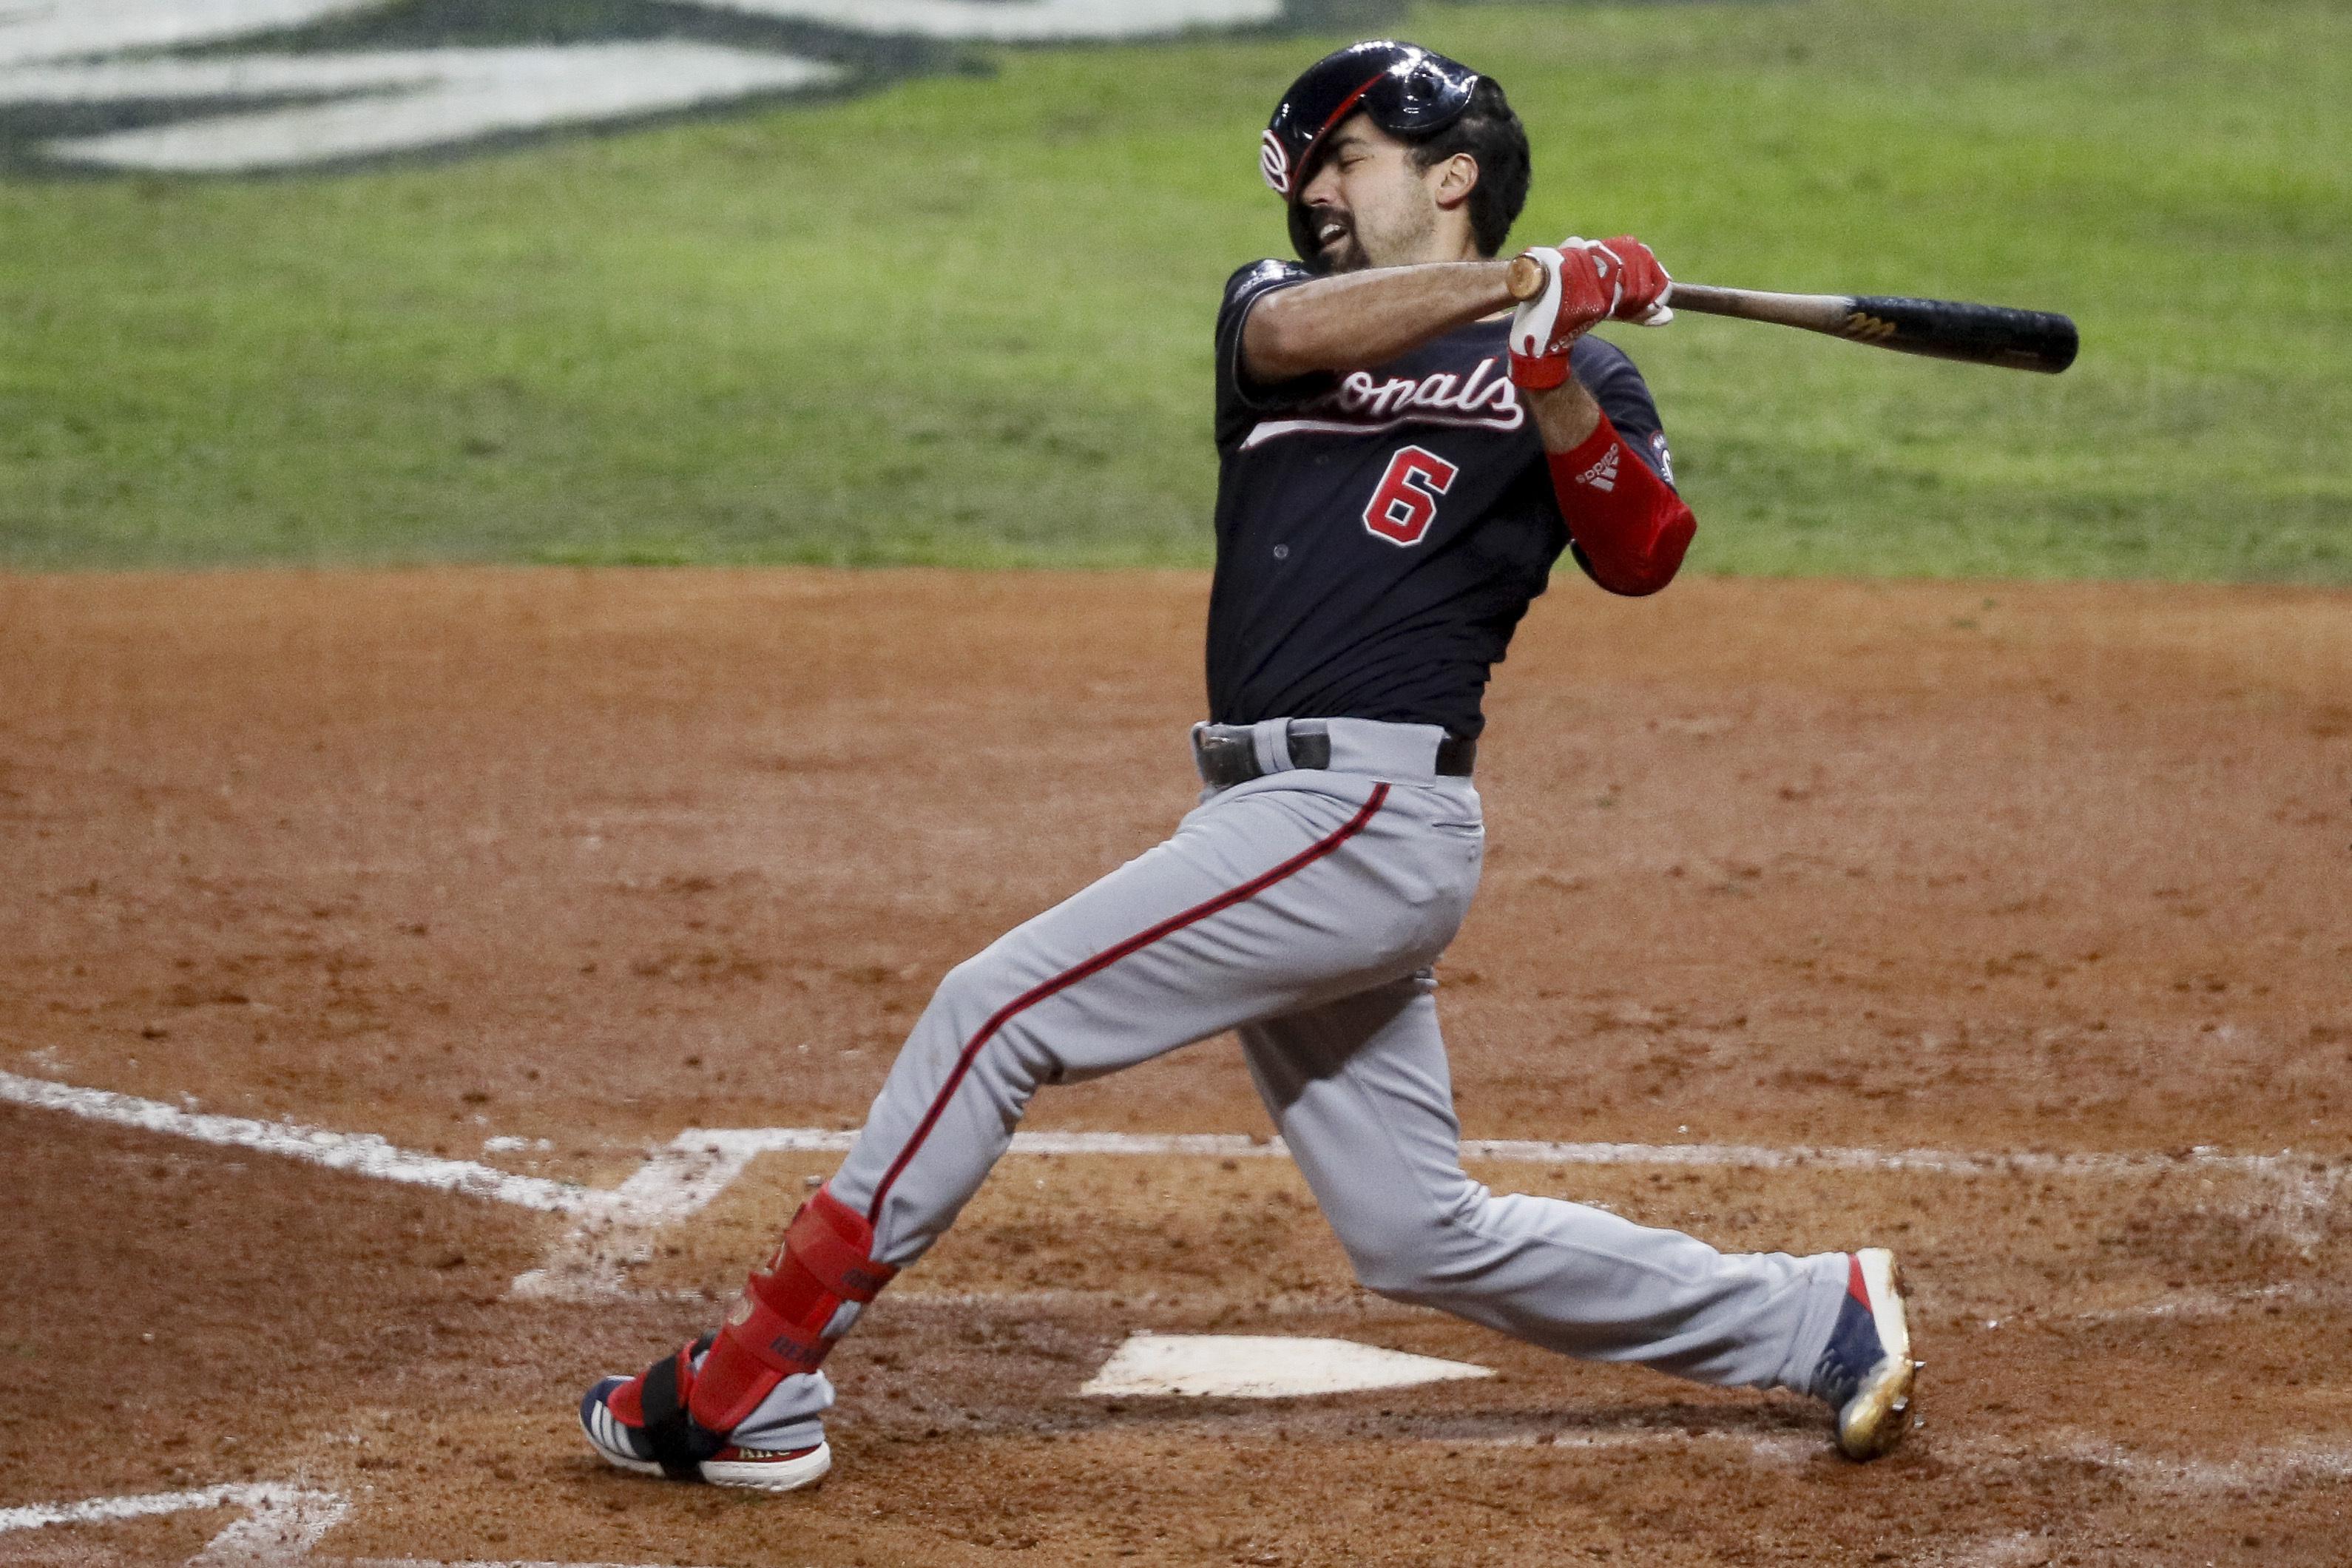 This is a 2019 photo of Anthony Rendon of the Washington Nationals